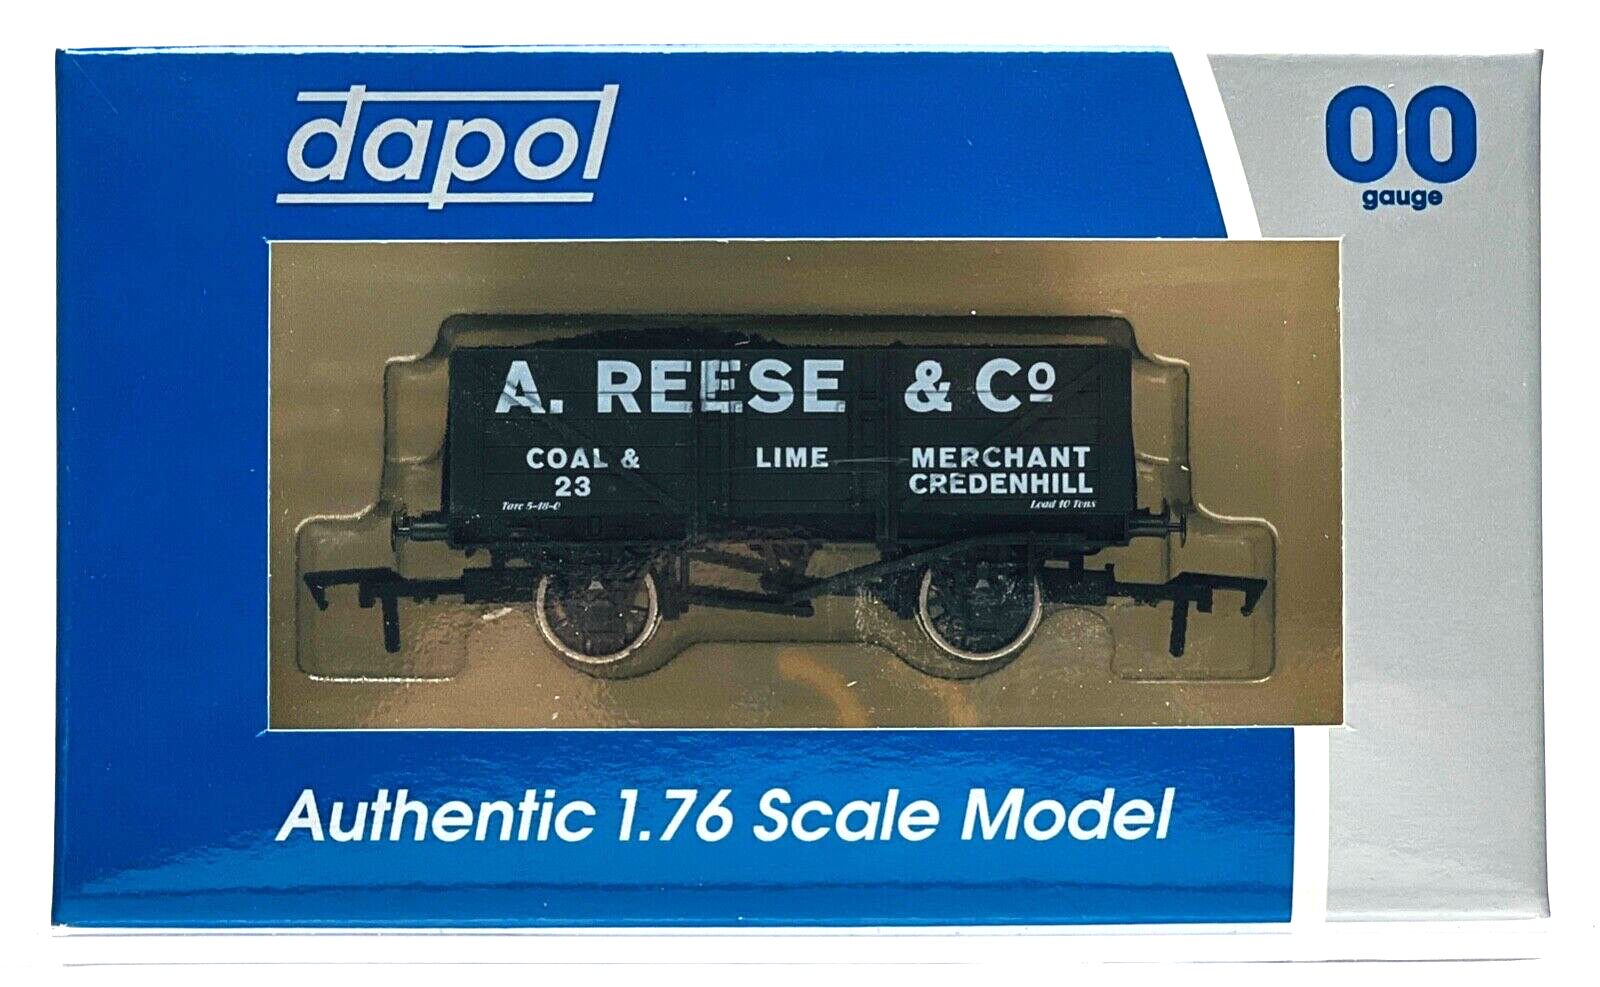 DAPOL 00 GAUGE - 'A. REESE COAL & LIME MERCHANT CREDENHILL 23' (LIMITED EDITION)